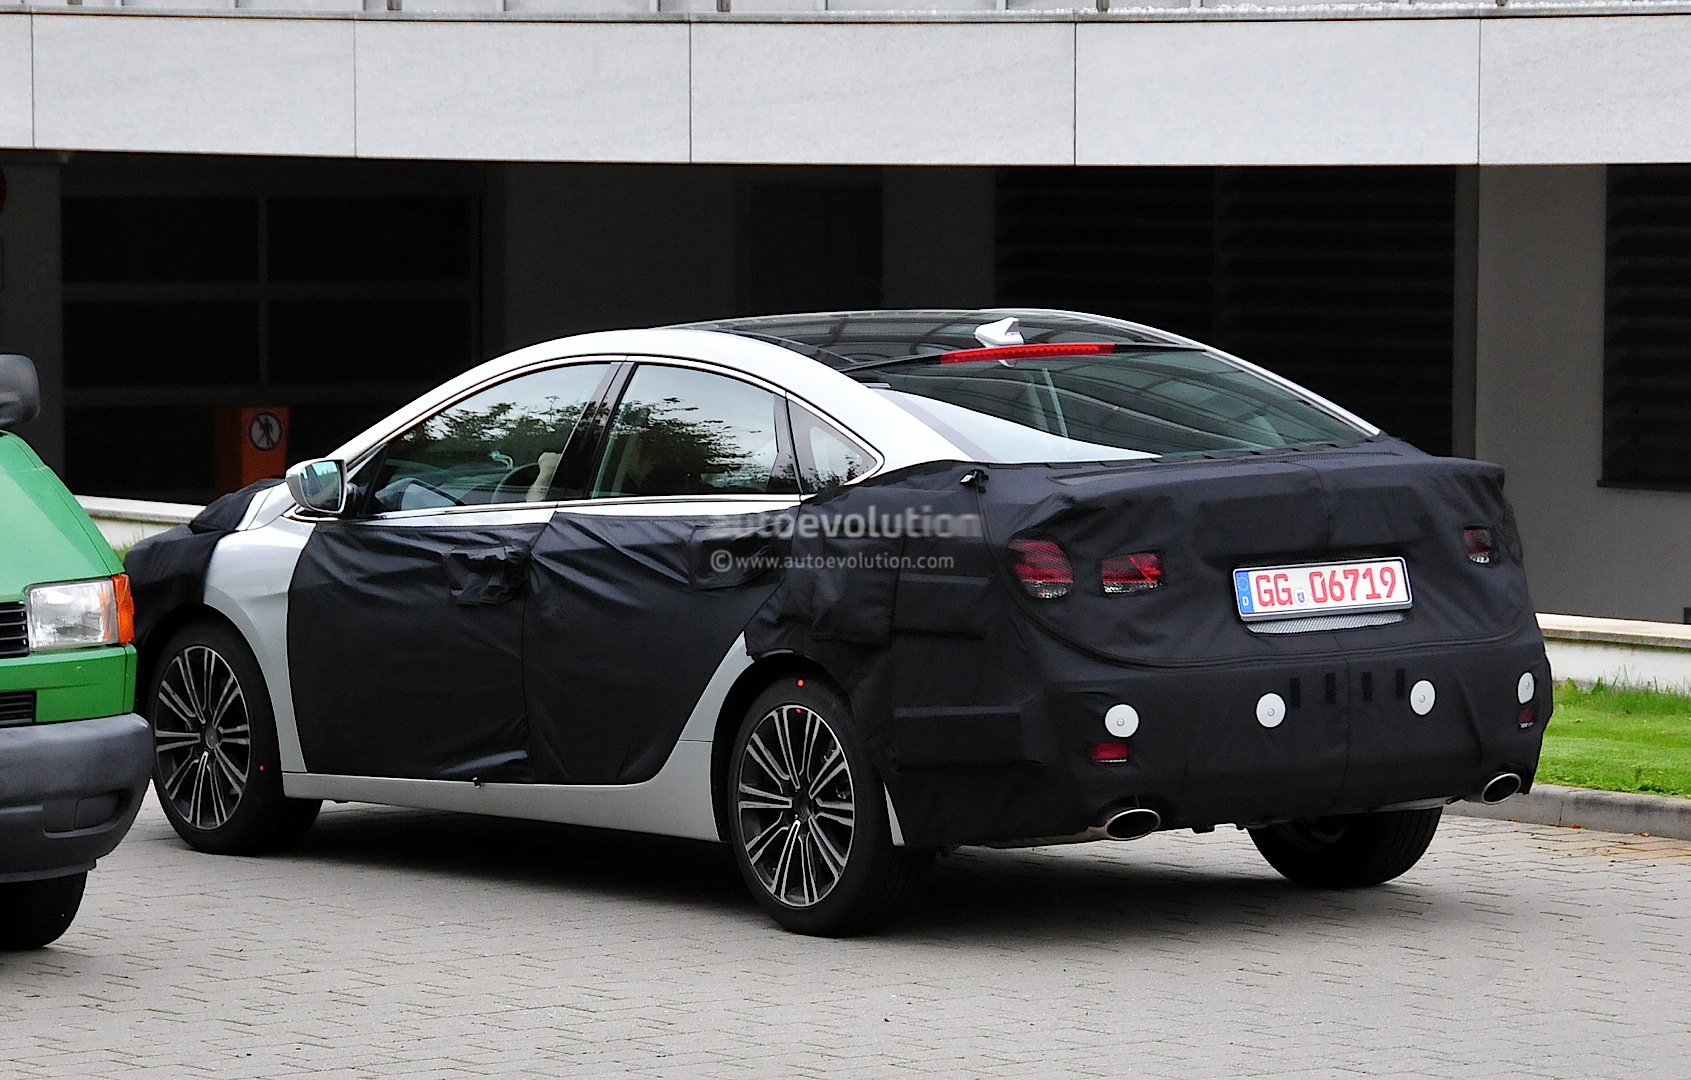 hyundai-i40-facelift-looks-snazzy-photo-gallery_7